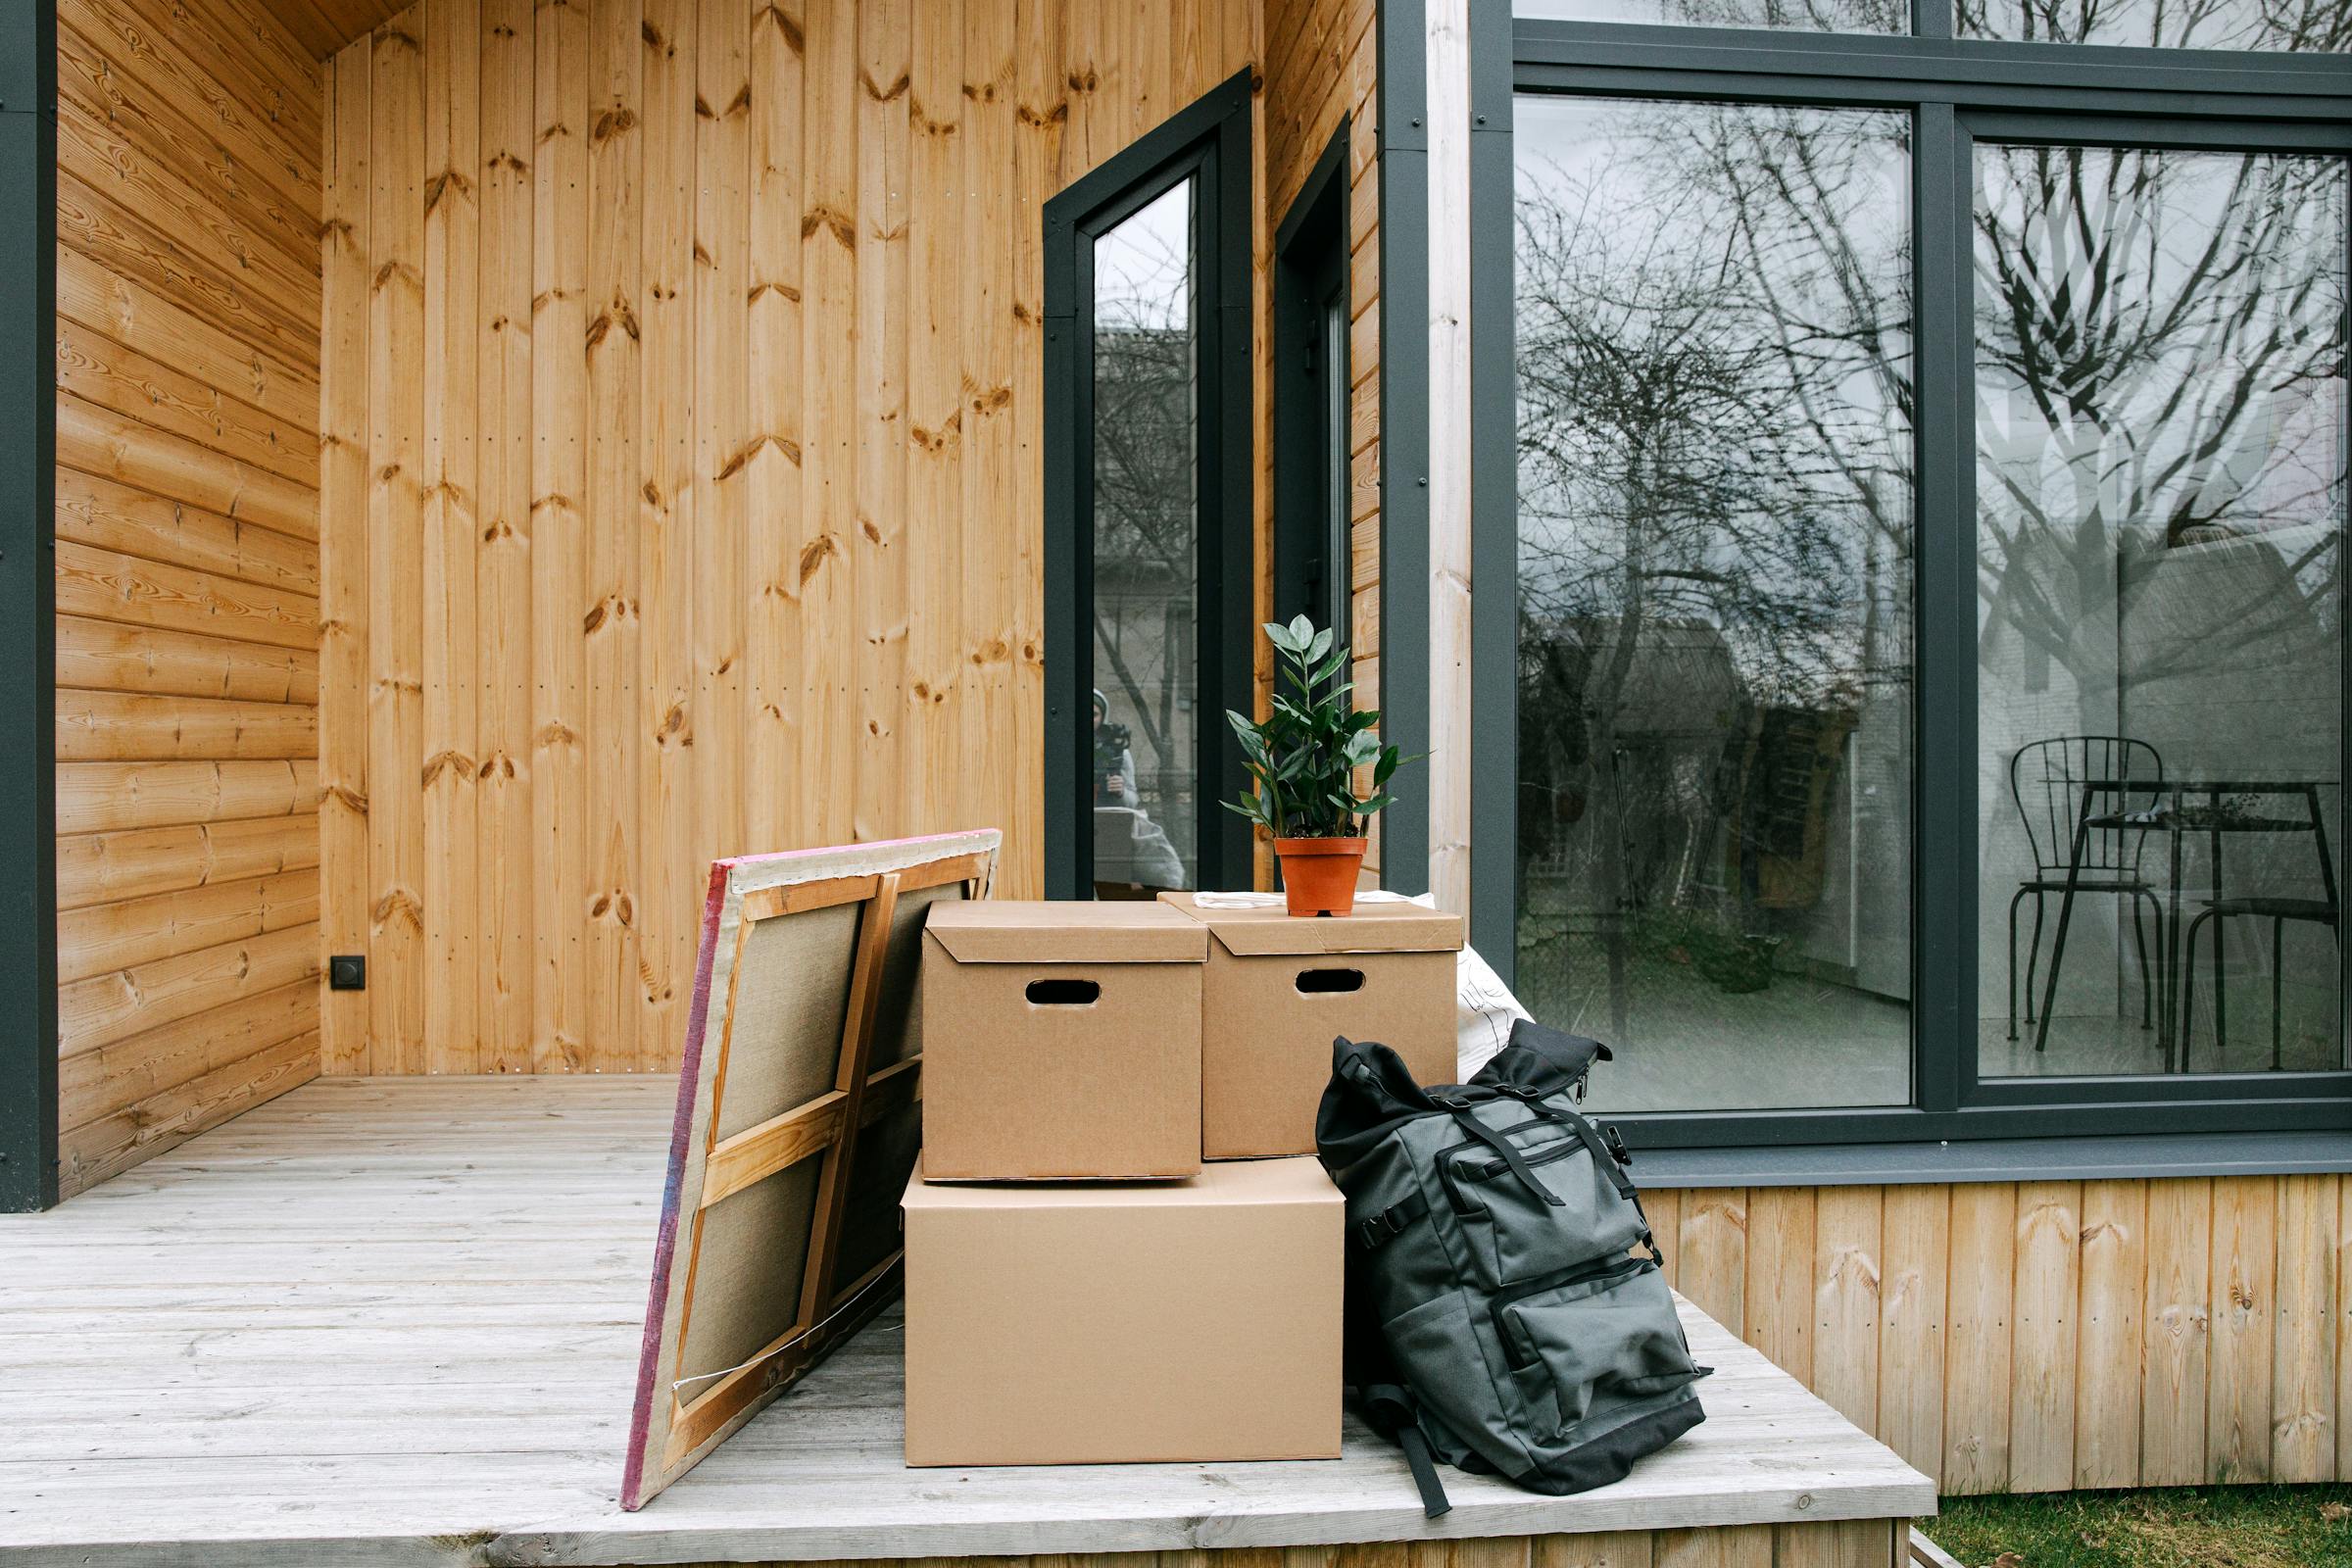 Boxes and personal belongings on a front porch | Source: Pexels